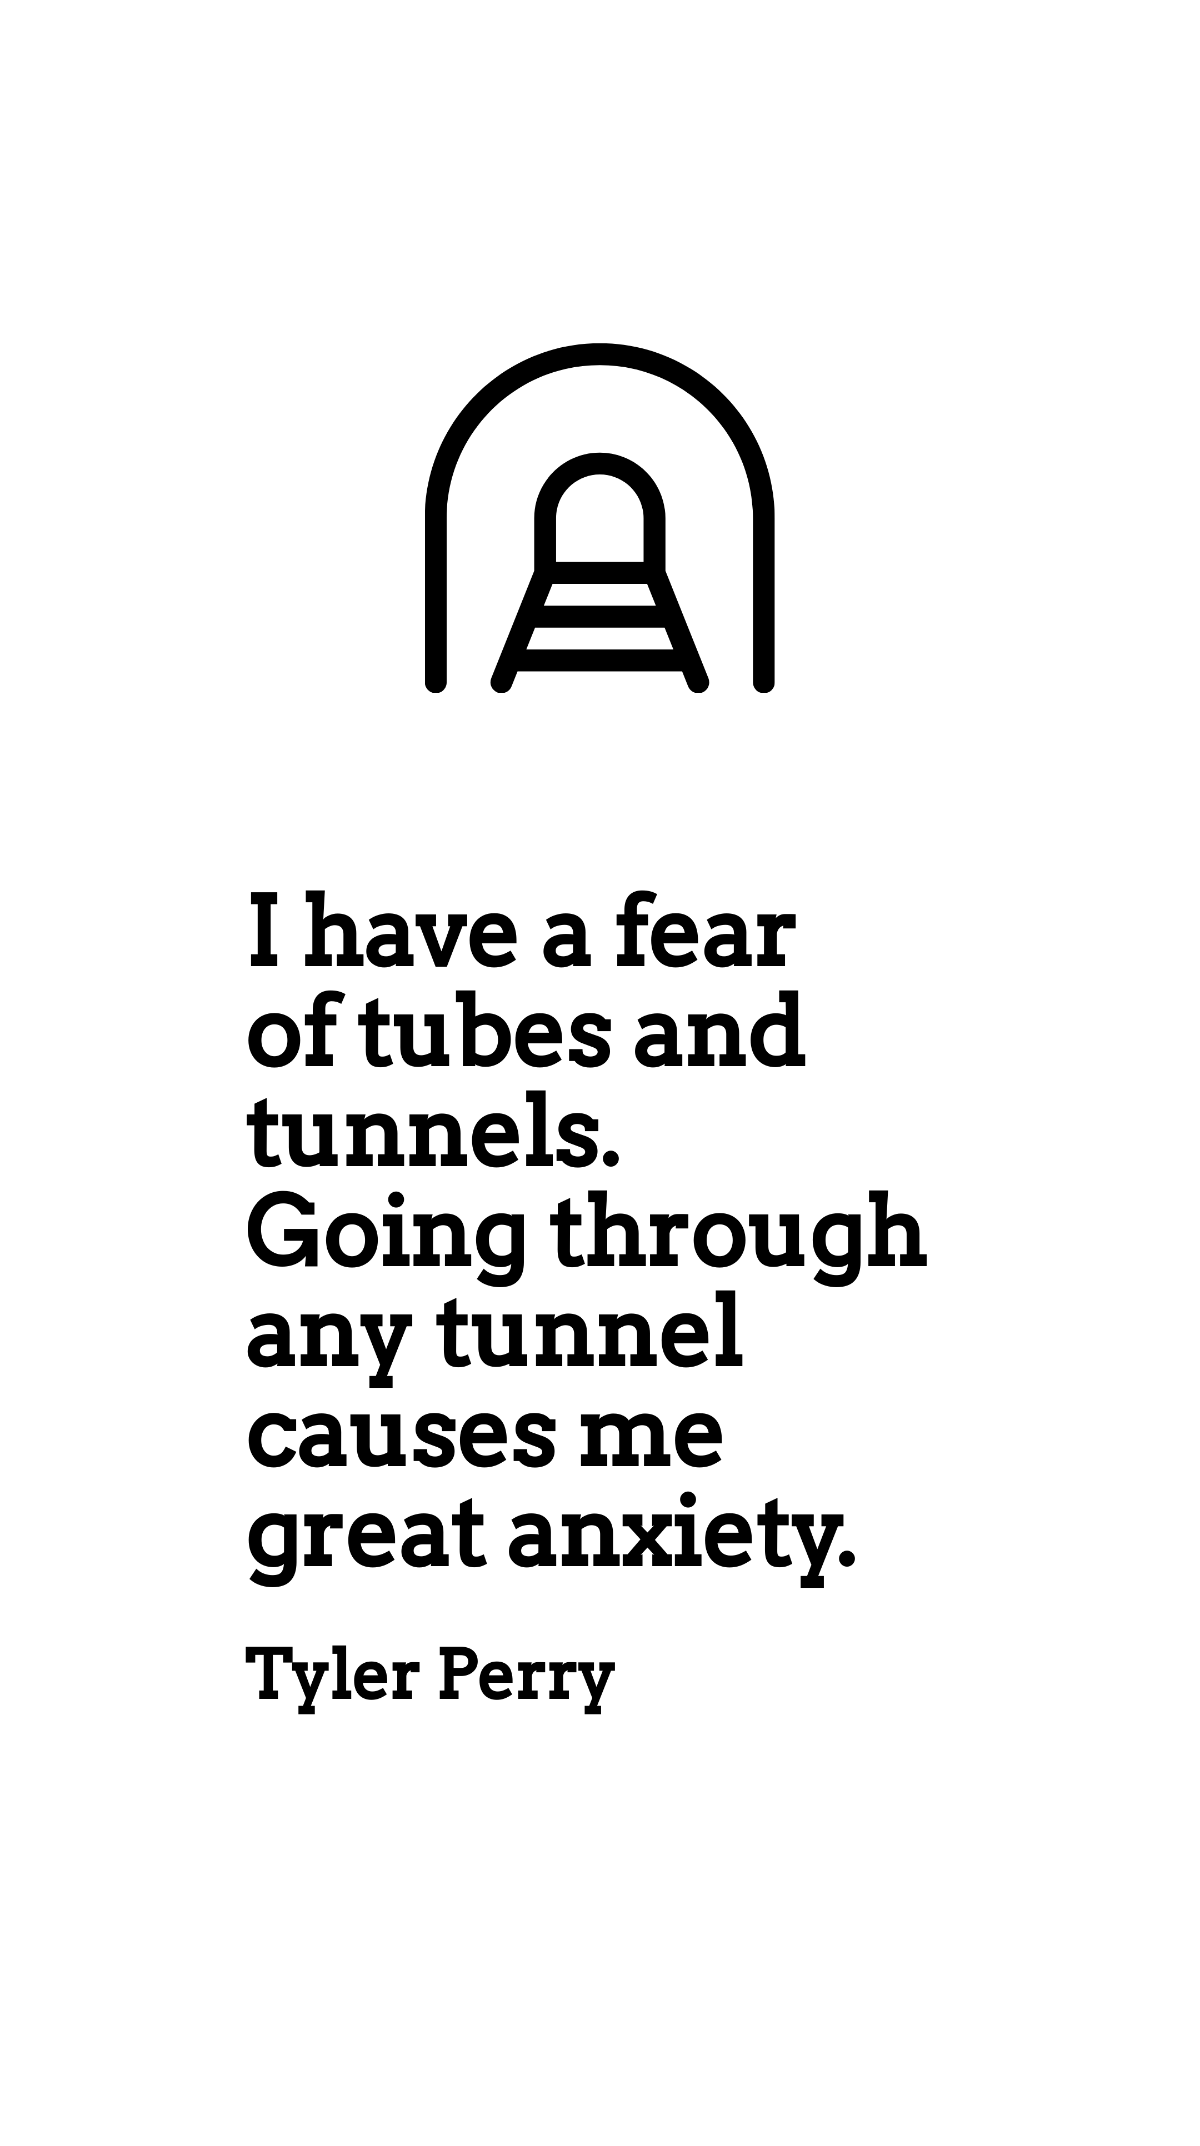 Tyler Perry - I have a fear of tubes and tunnels. Going through any tunnel causes me great anxiety. Template